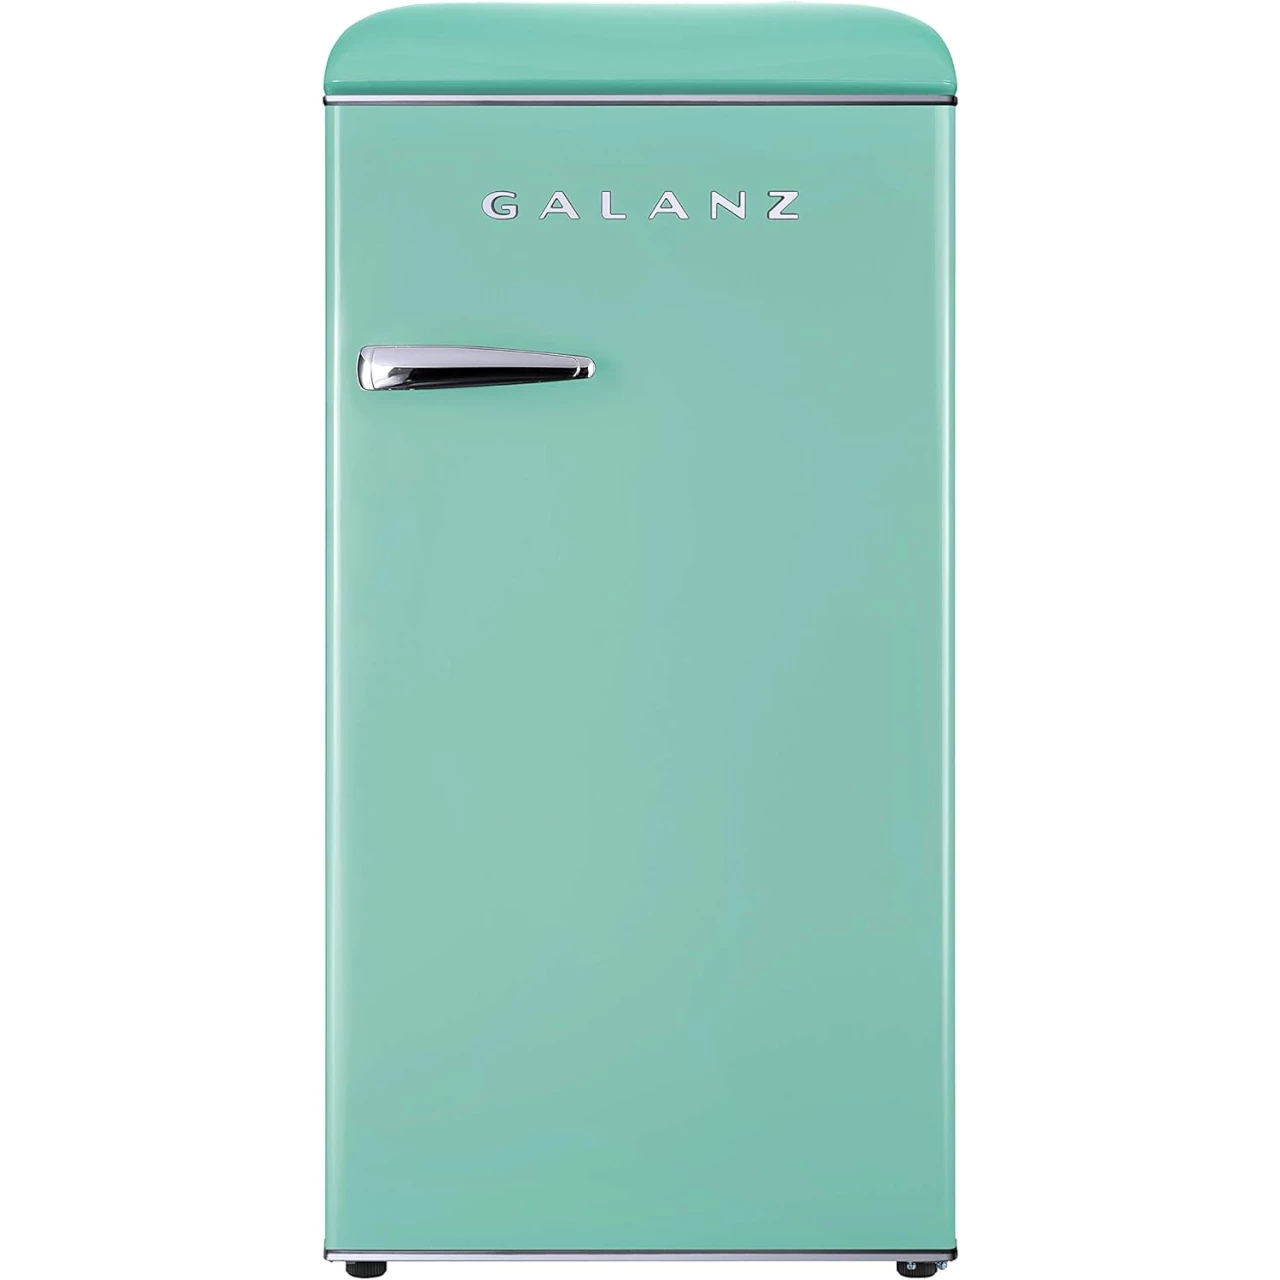 Galanz GLR33MGNR10 Retro Compact Refrigerator, Single Door Fridge, Adjustable Mechanical Thermostat with Chiller, Green, 3.3 Cu Ft